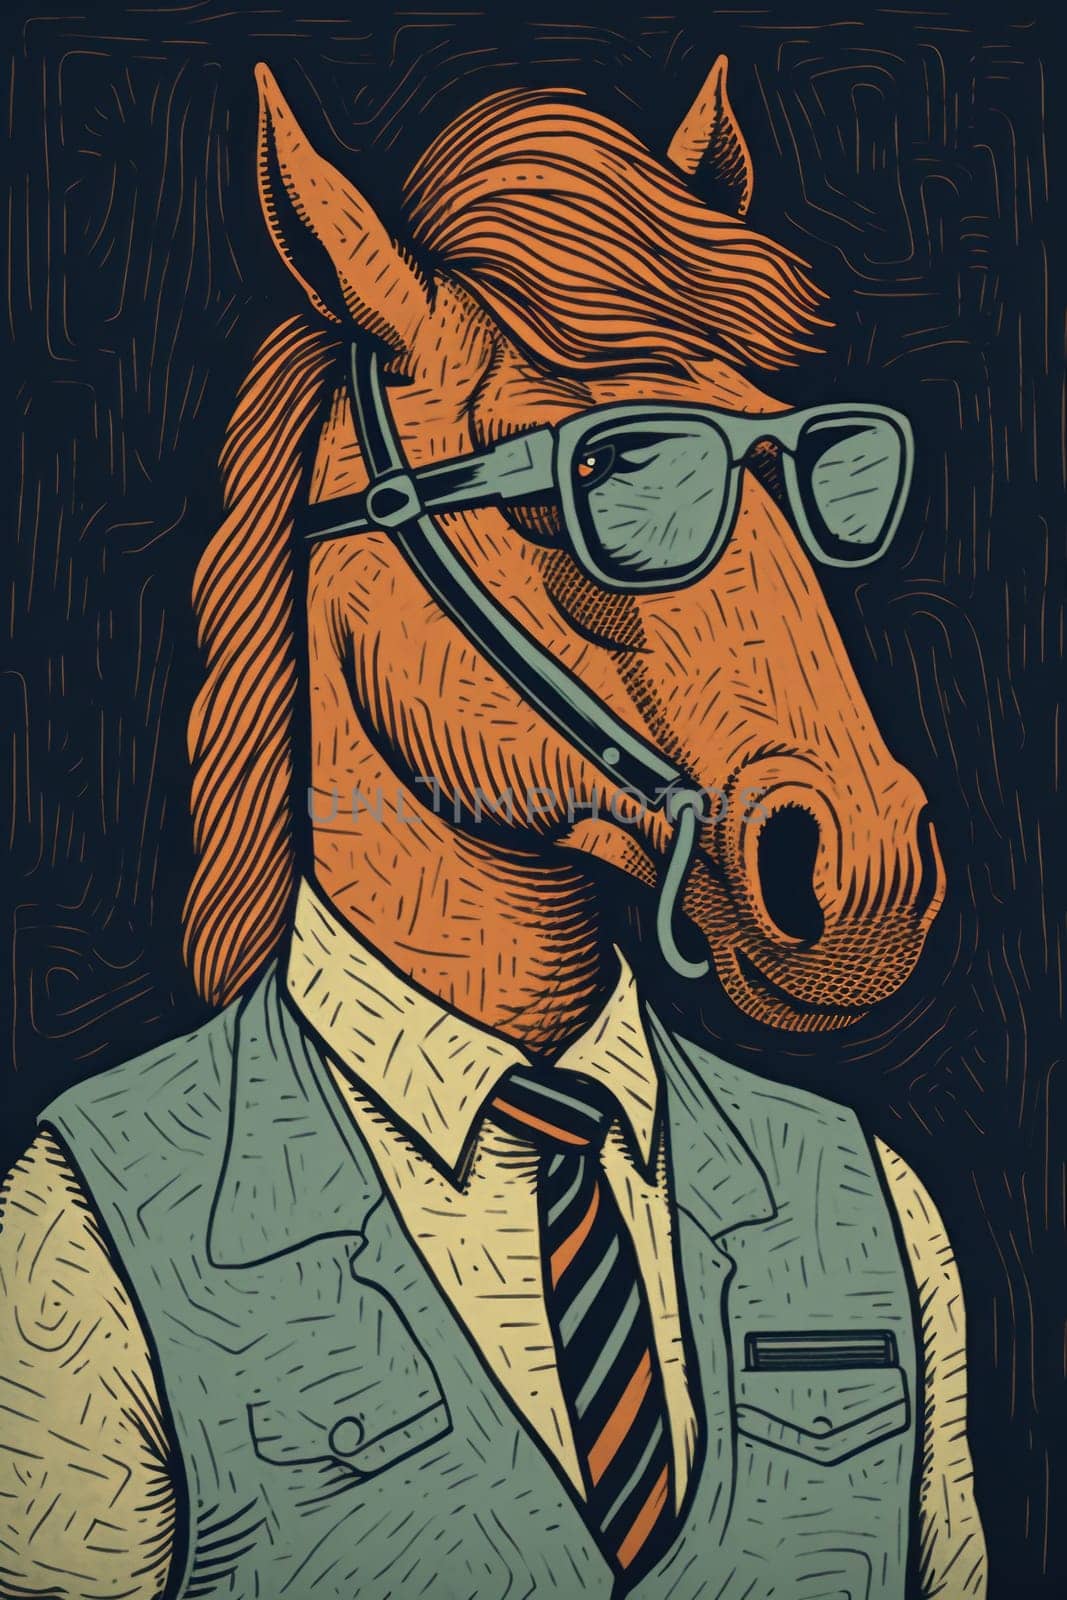 A horse wearing glasses and a tie